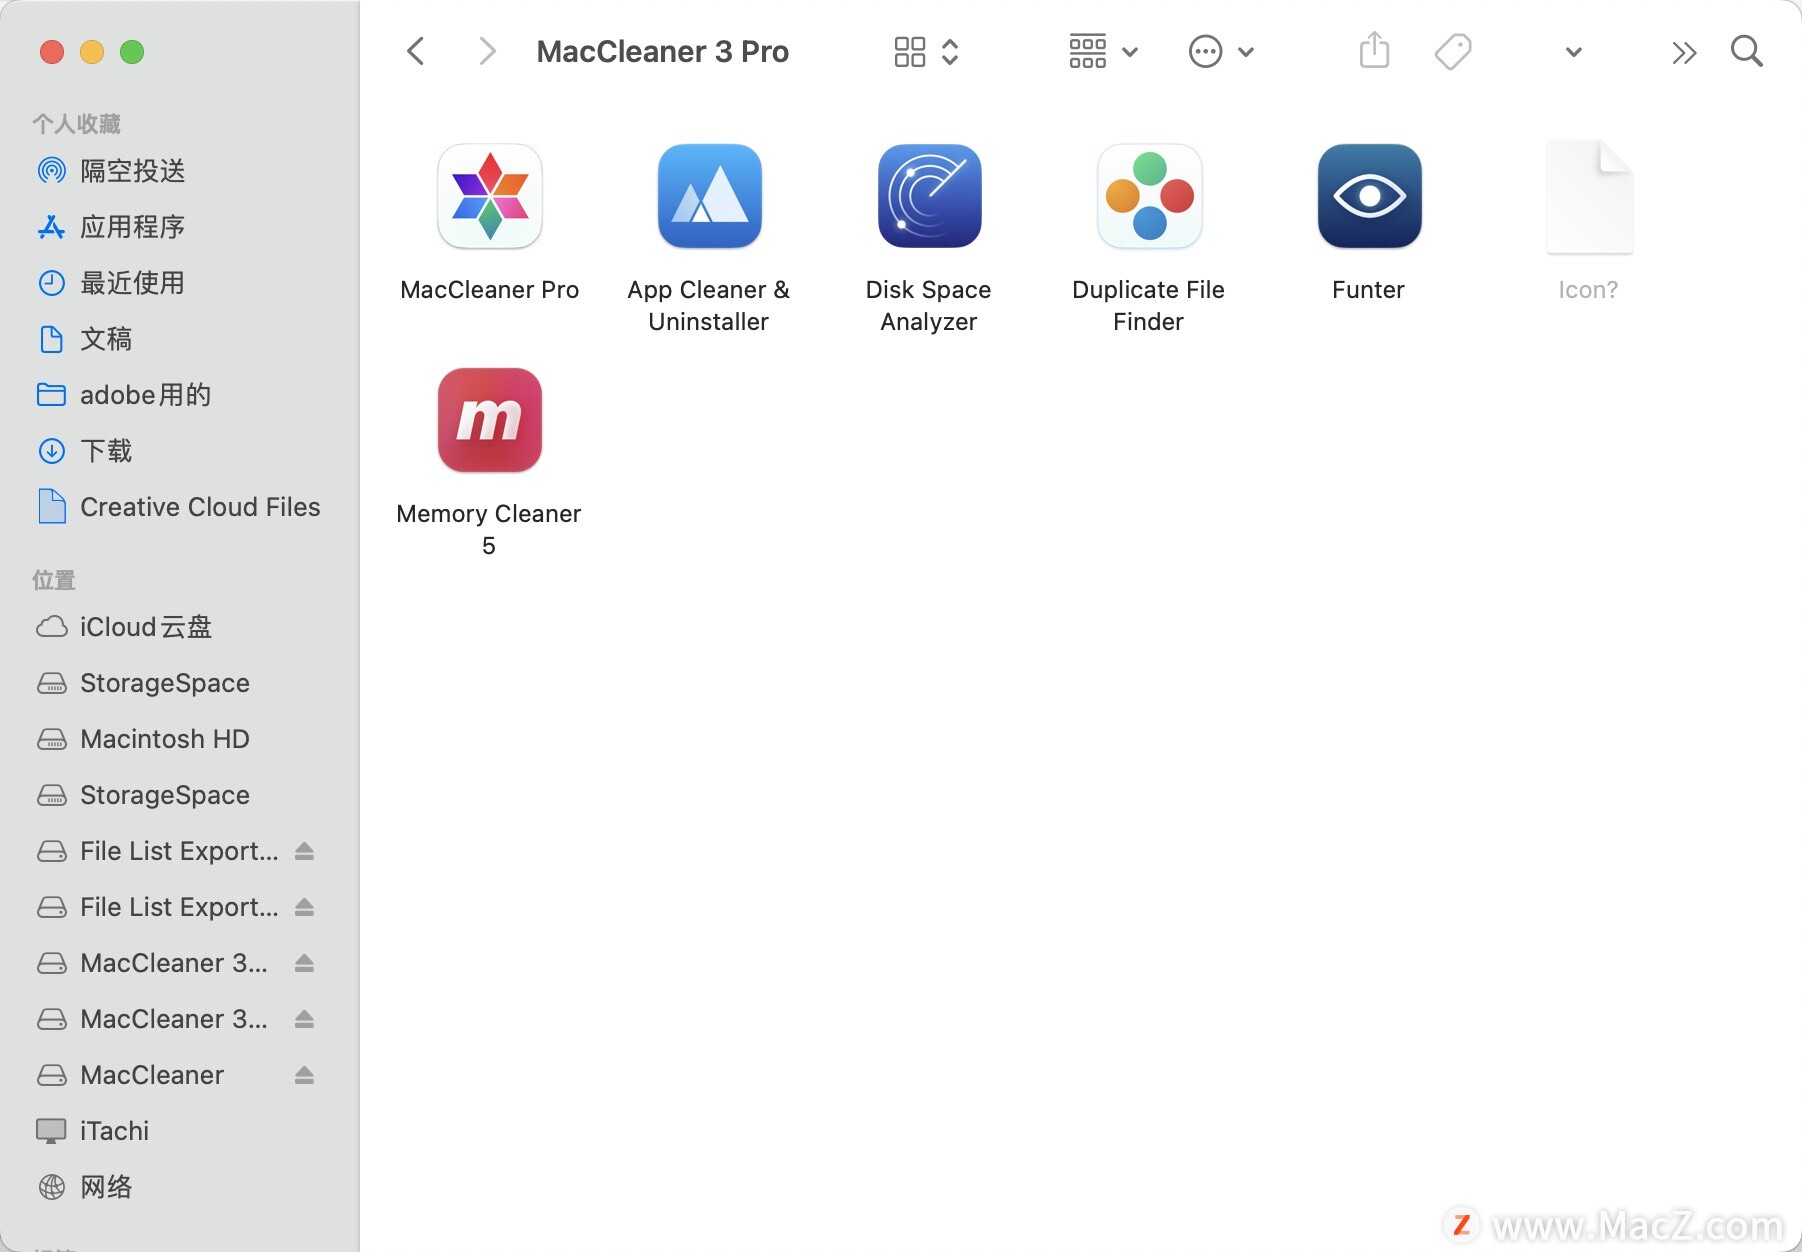 download the new version MacCleaner 3 PRO